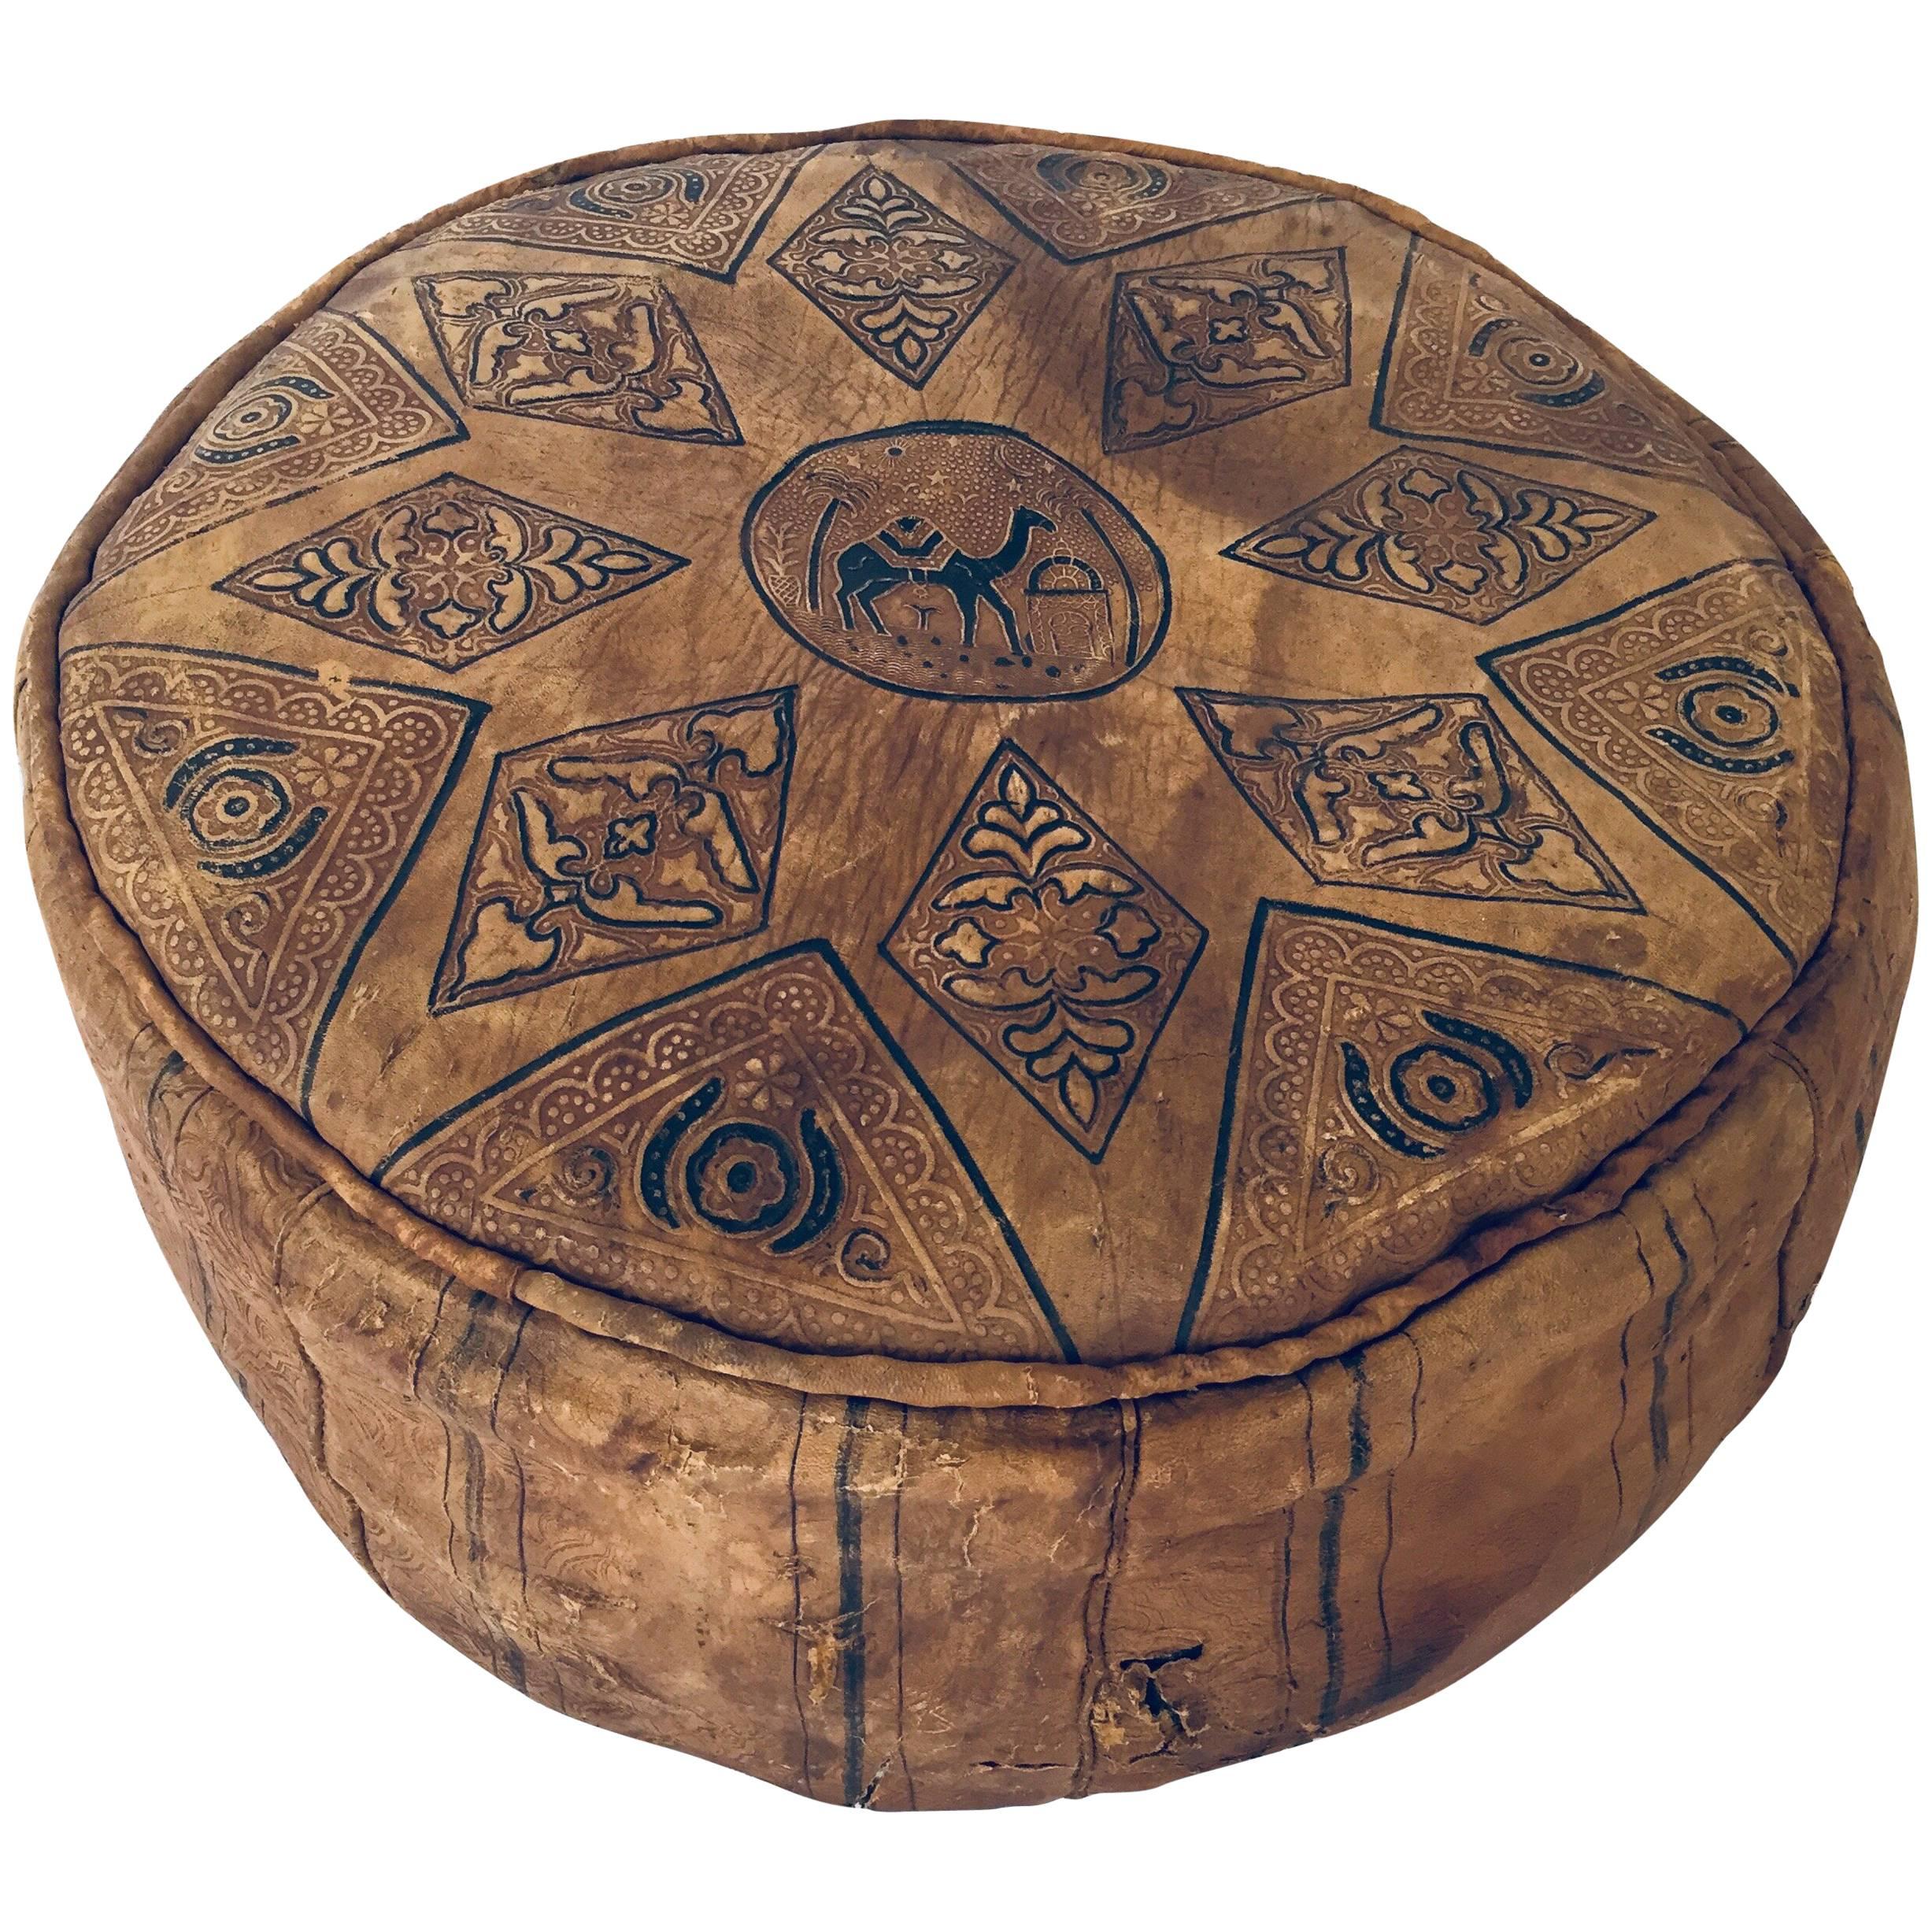 Moroccan Round Pouf Hand-Tooled and Embossed in Fez Morocco